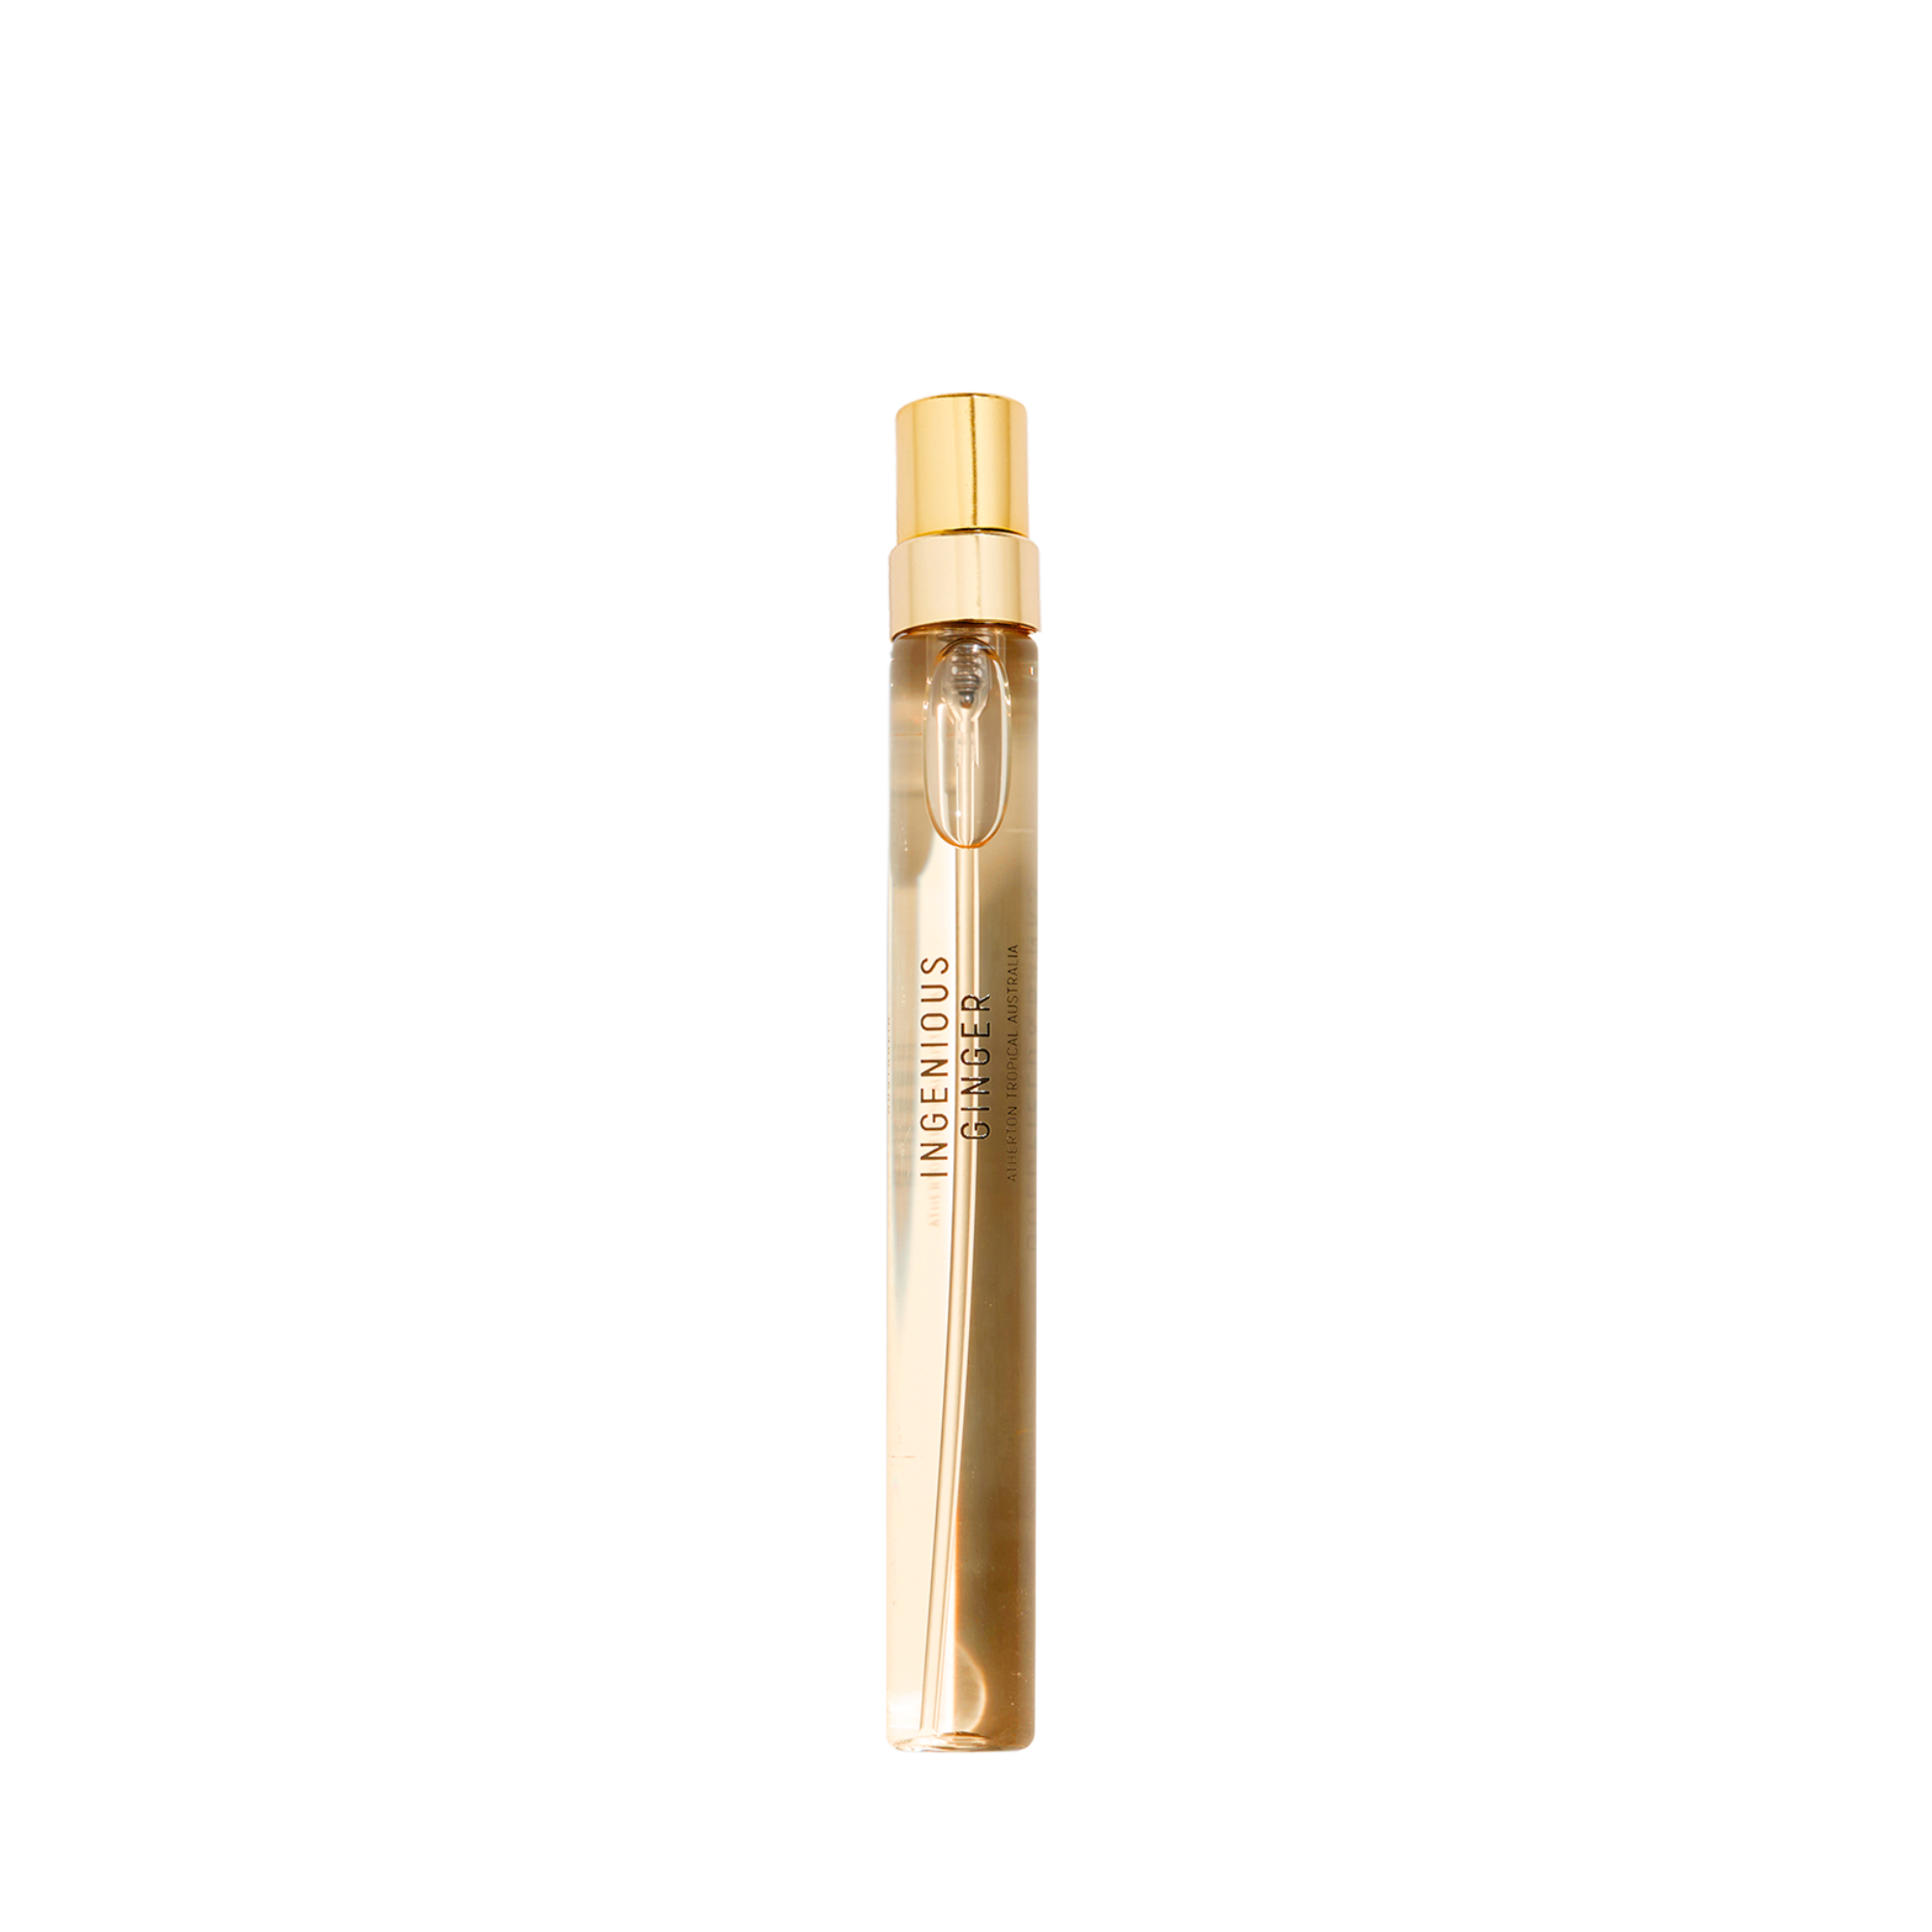 Ingenious Ginger Perfume Concentrate